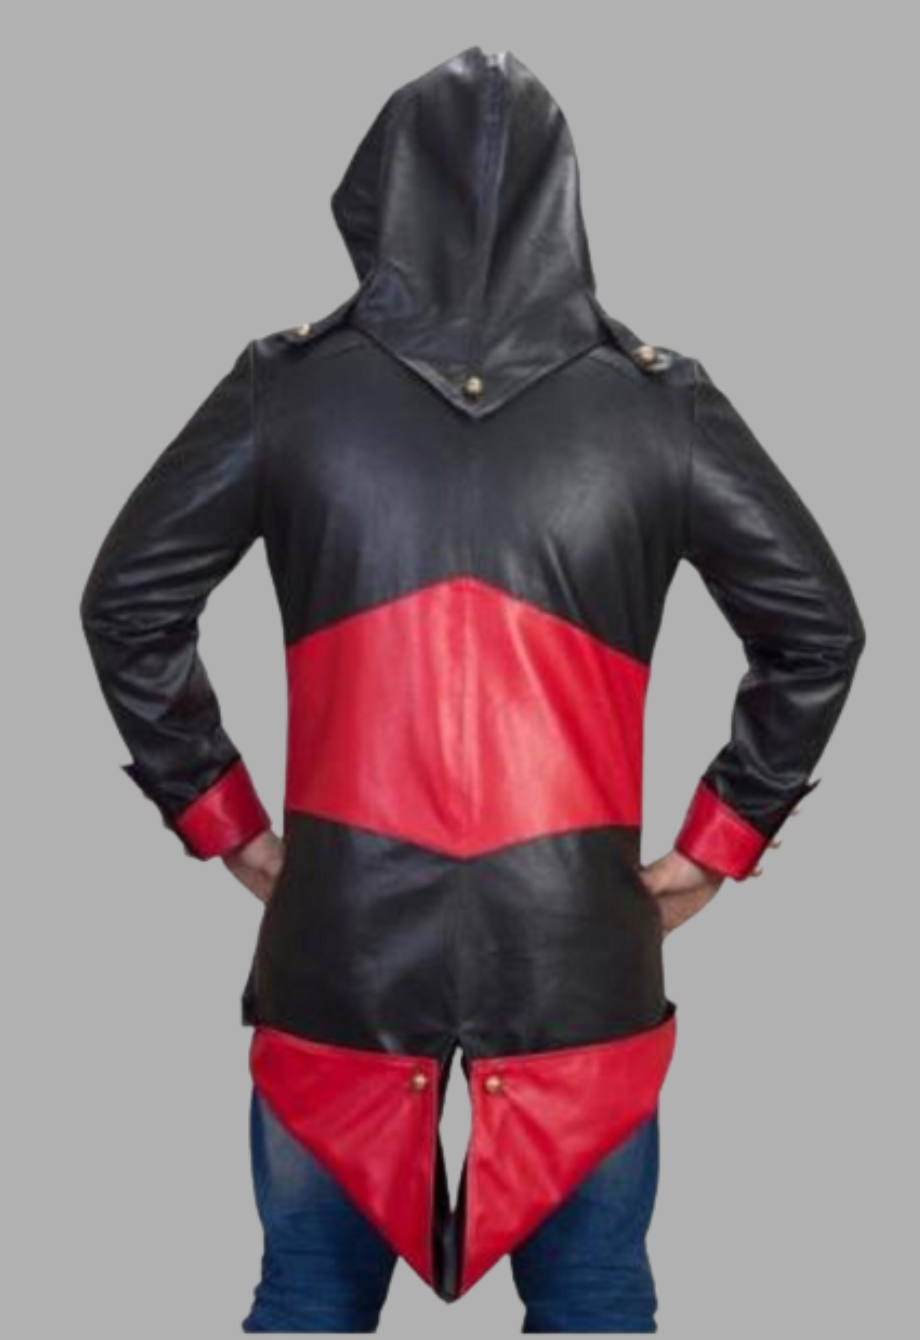 Mens Black and Red Removable Hoodie Creed Leather Coat Jacket